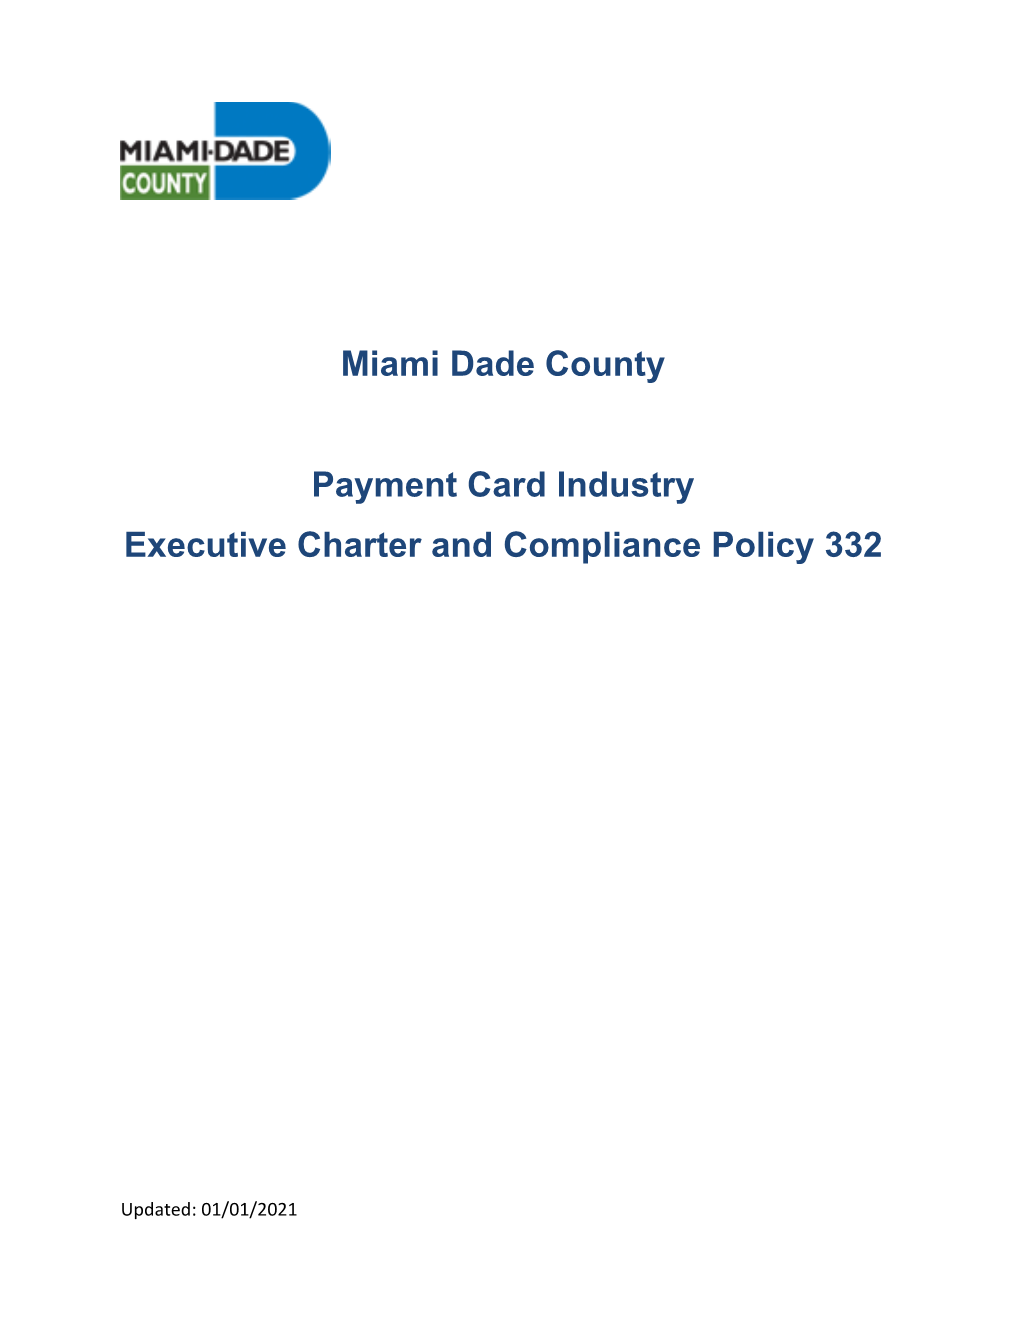 Miami Dade County Payment Card Industry Executive Charter and Compliance Policy Number 332